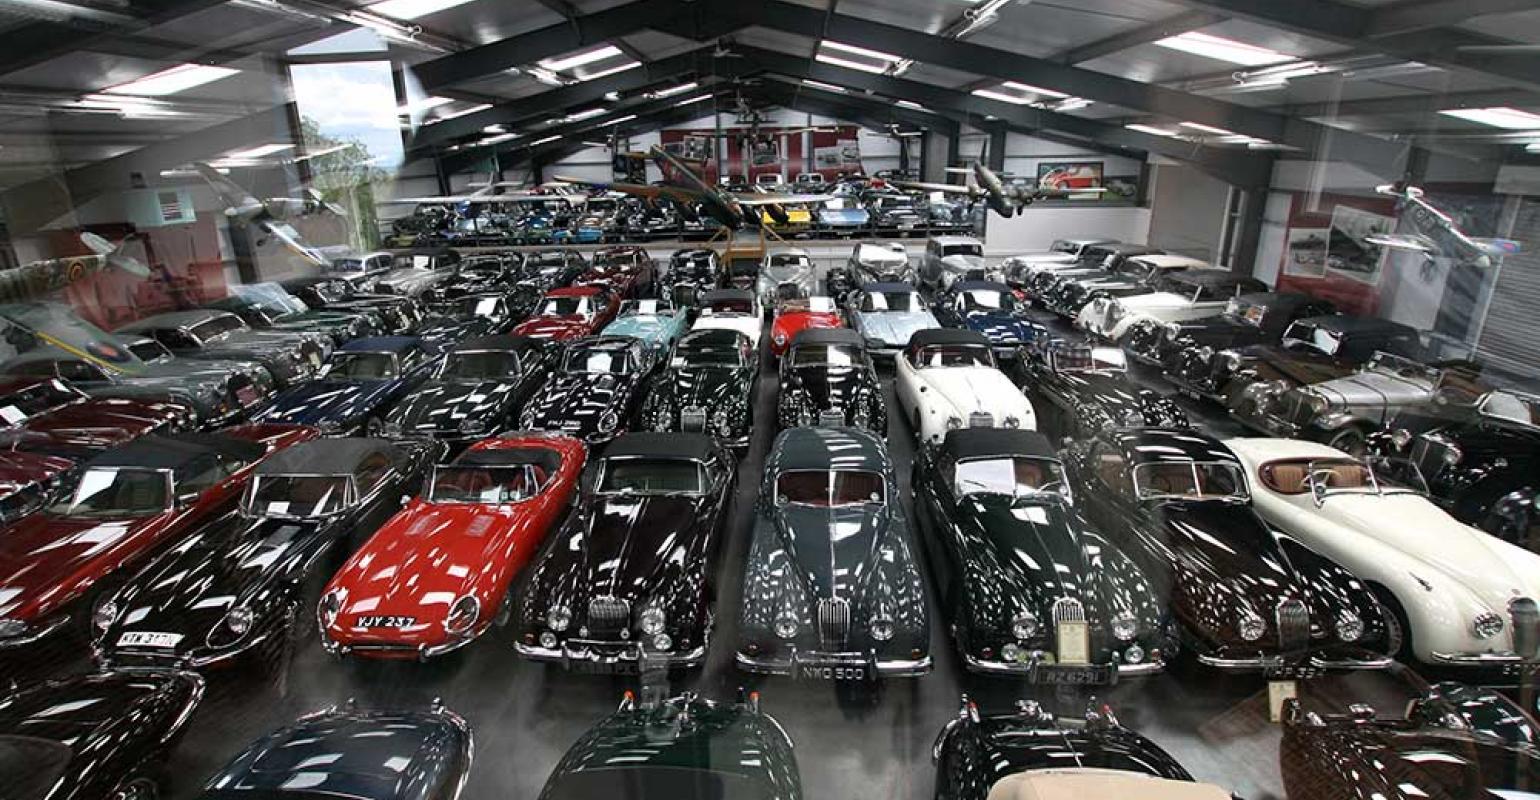 Check out these best vintage cars that are sough after by collectors. (Photo: WardsAuto)